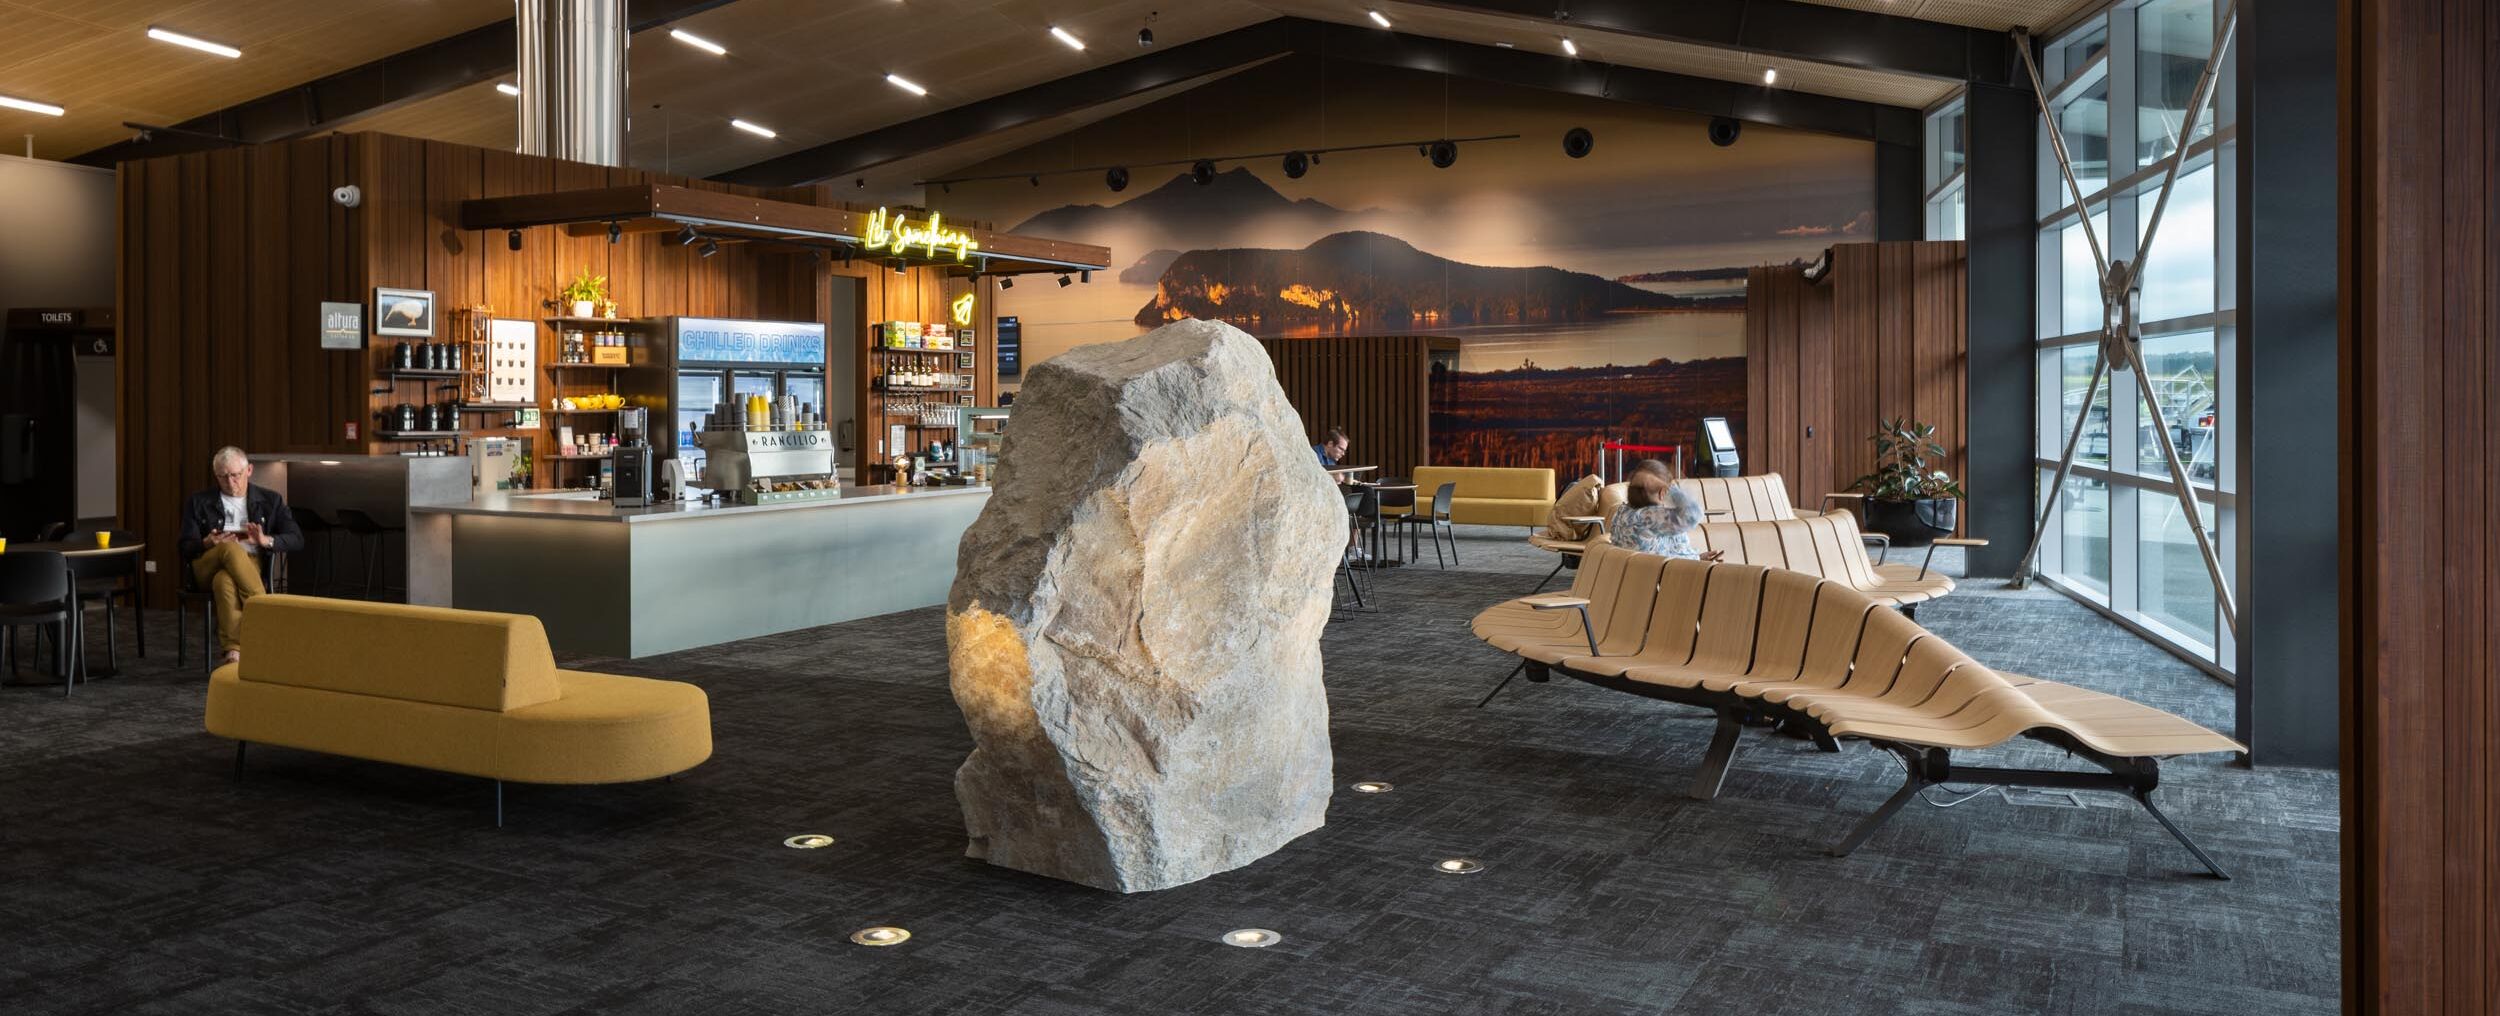 Taupo Airport furniture by Harrows, design by Shelter Architects